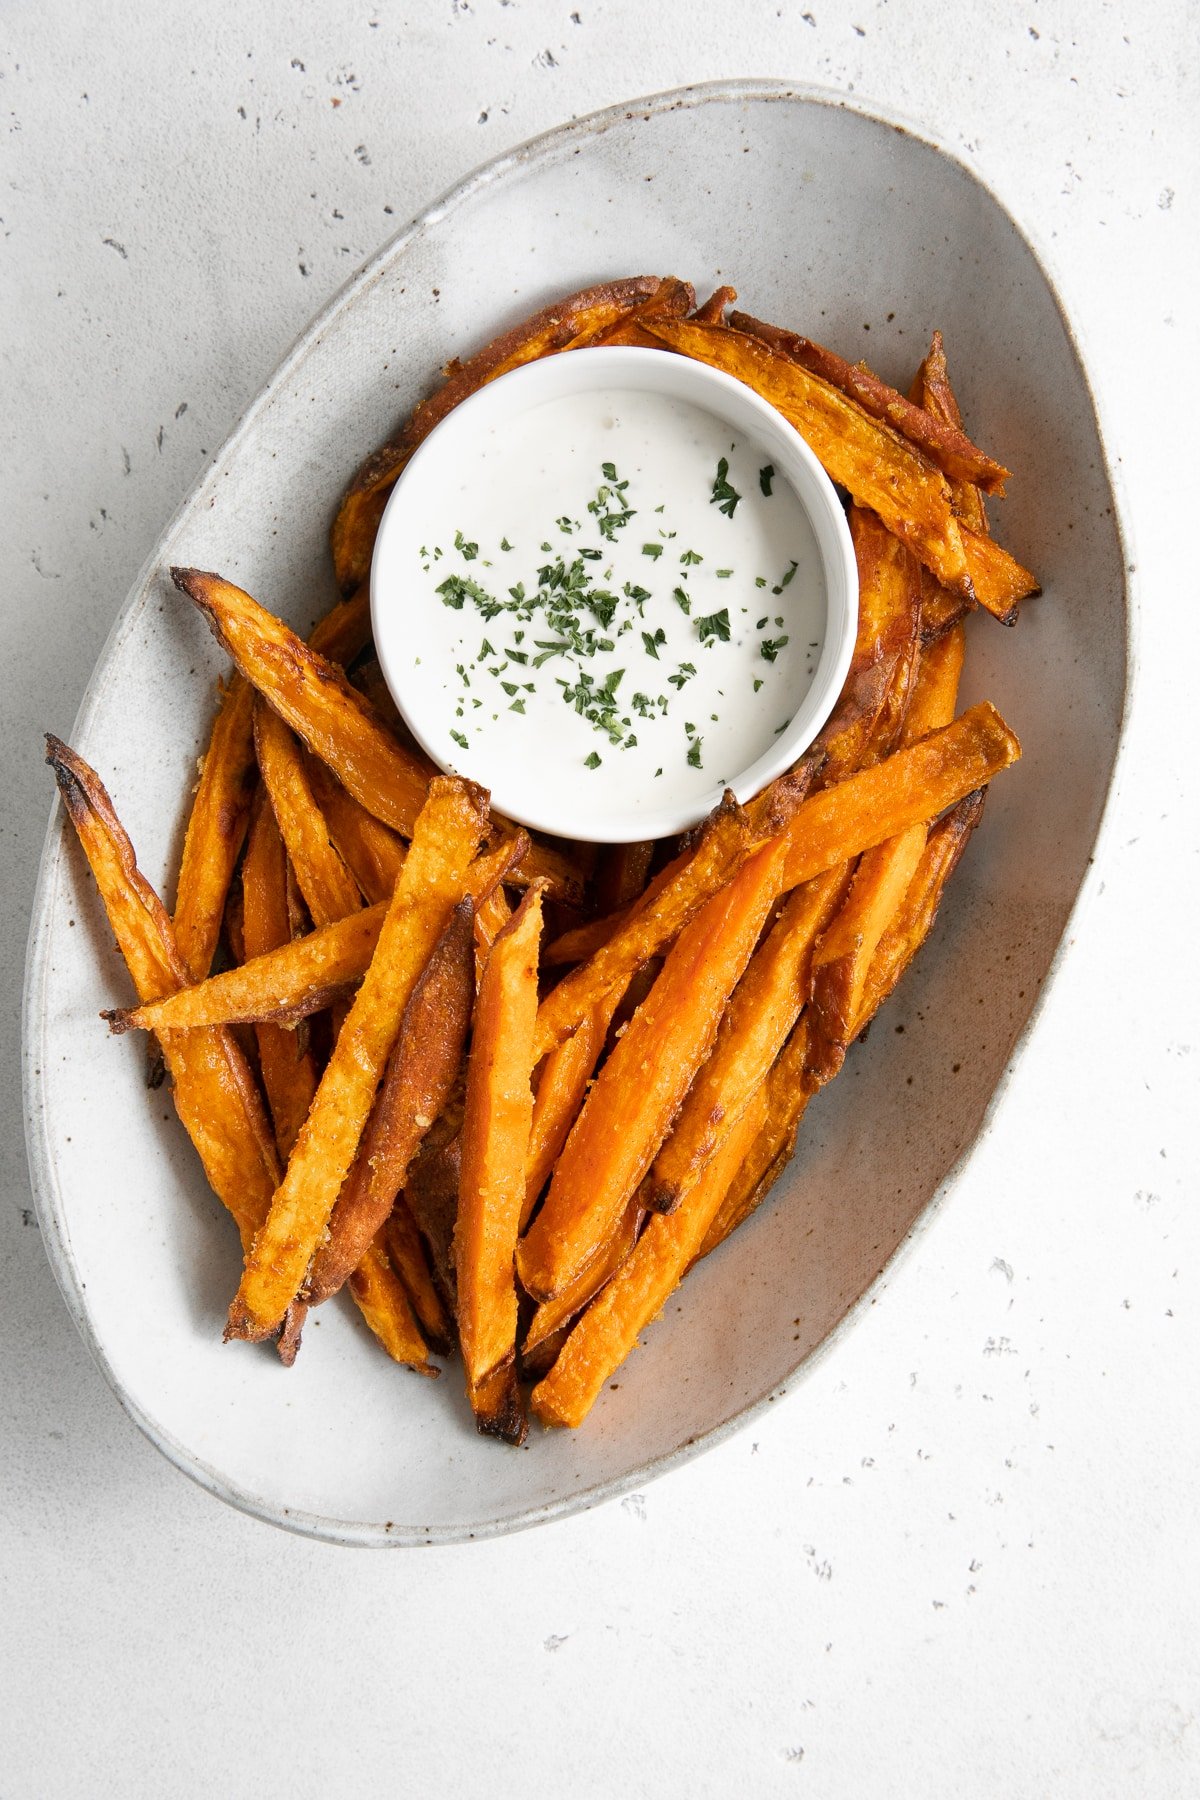 Oval serving dish filled with homemade baked sweet potato fries and served with ranch dressing.